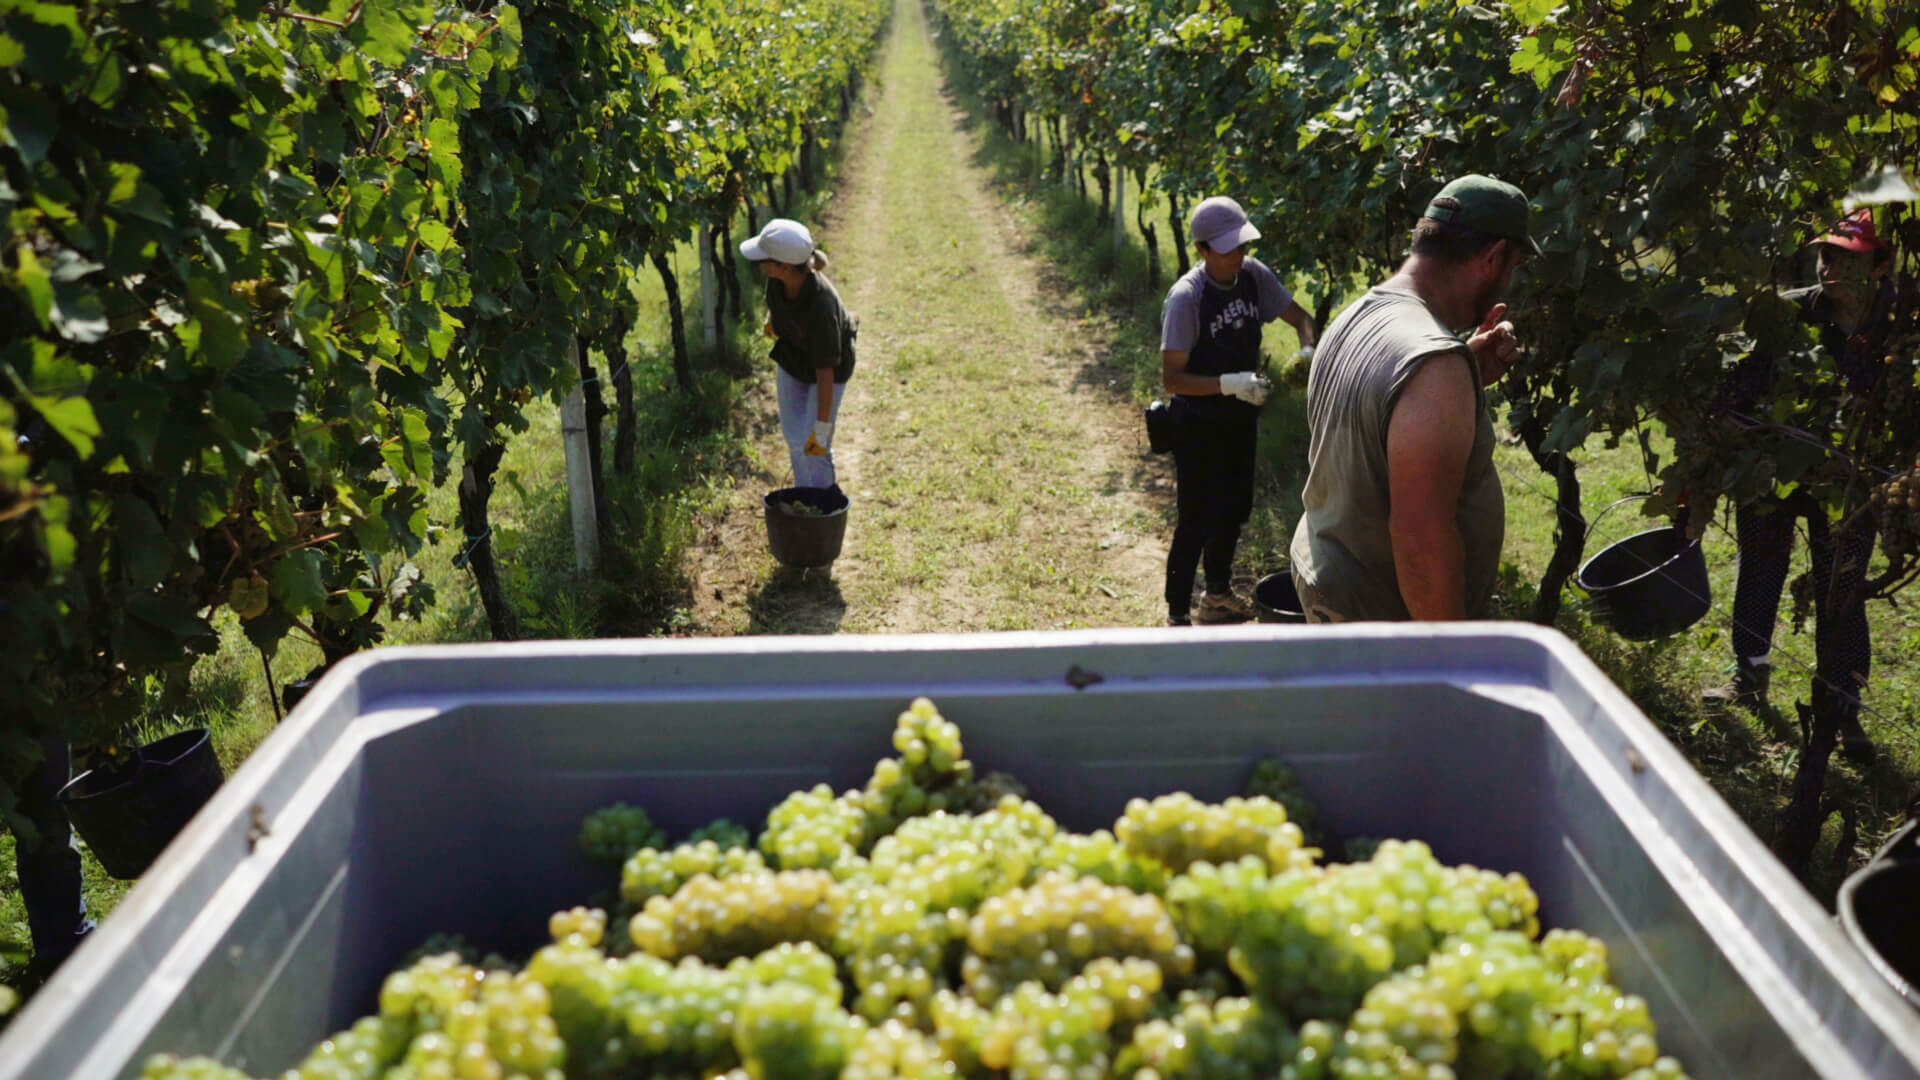 People harvest grapes in a vineyard